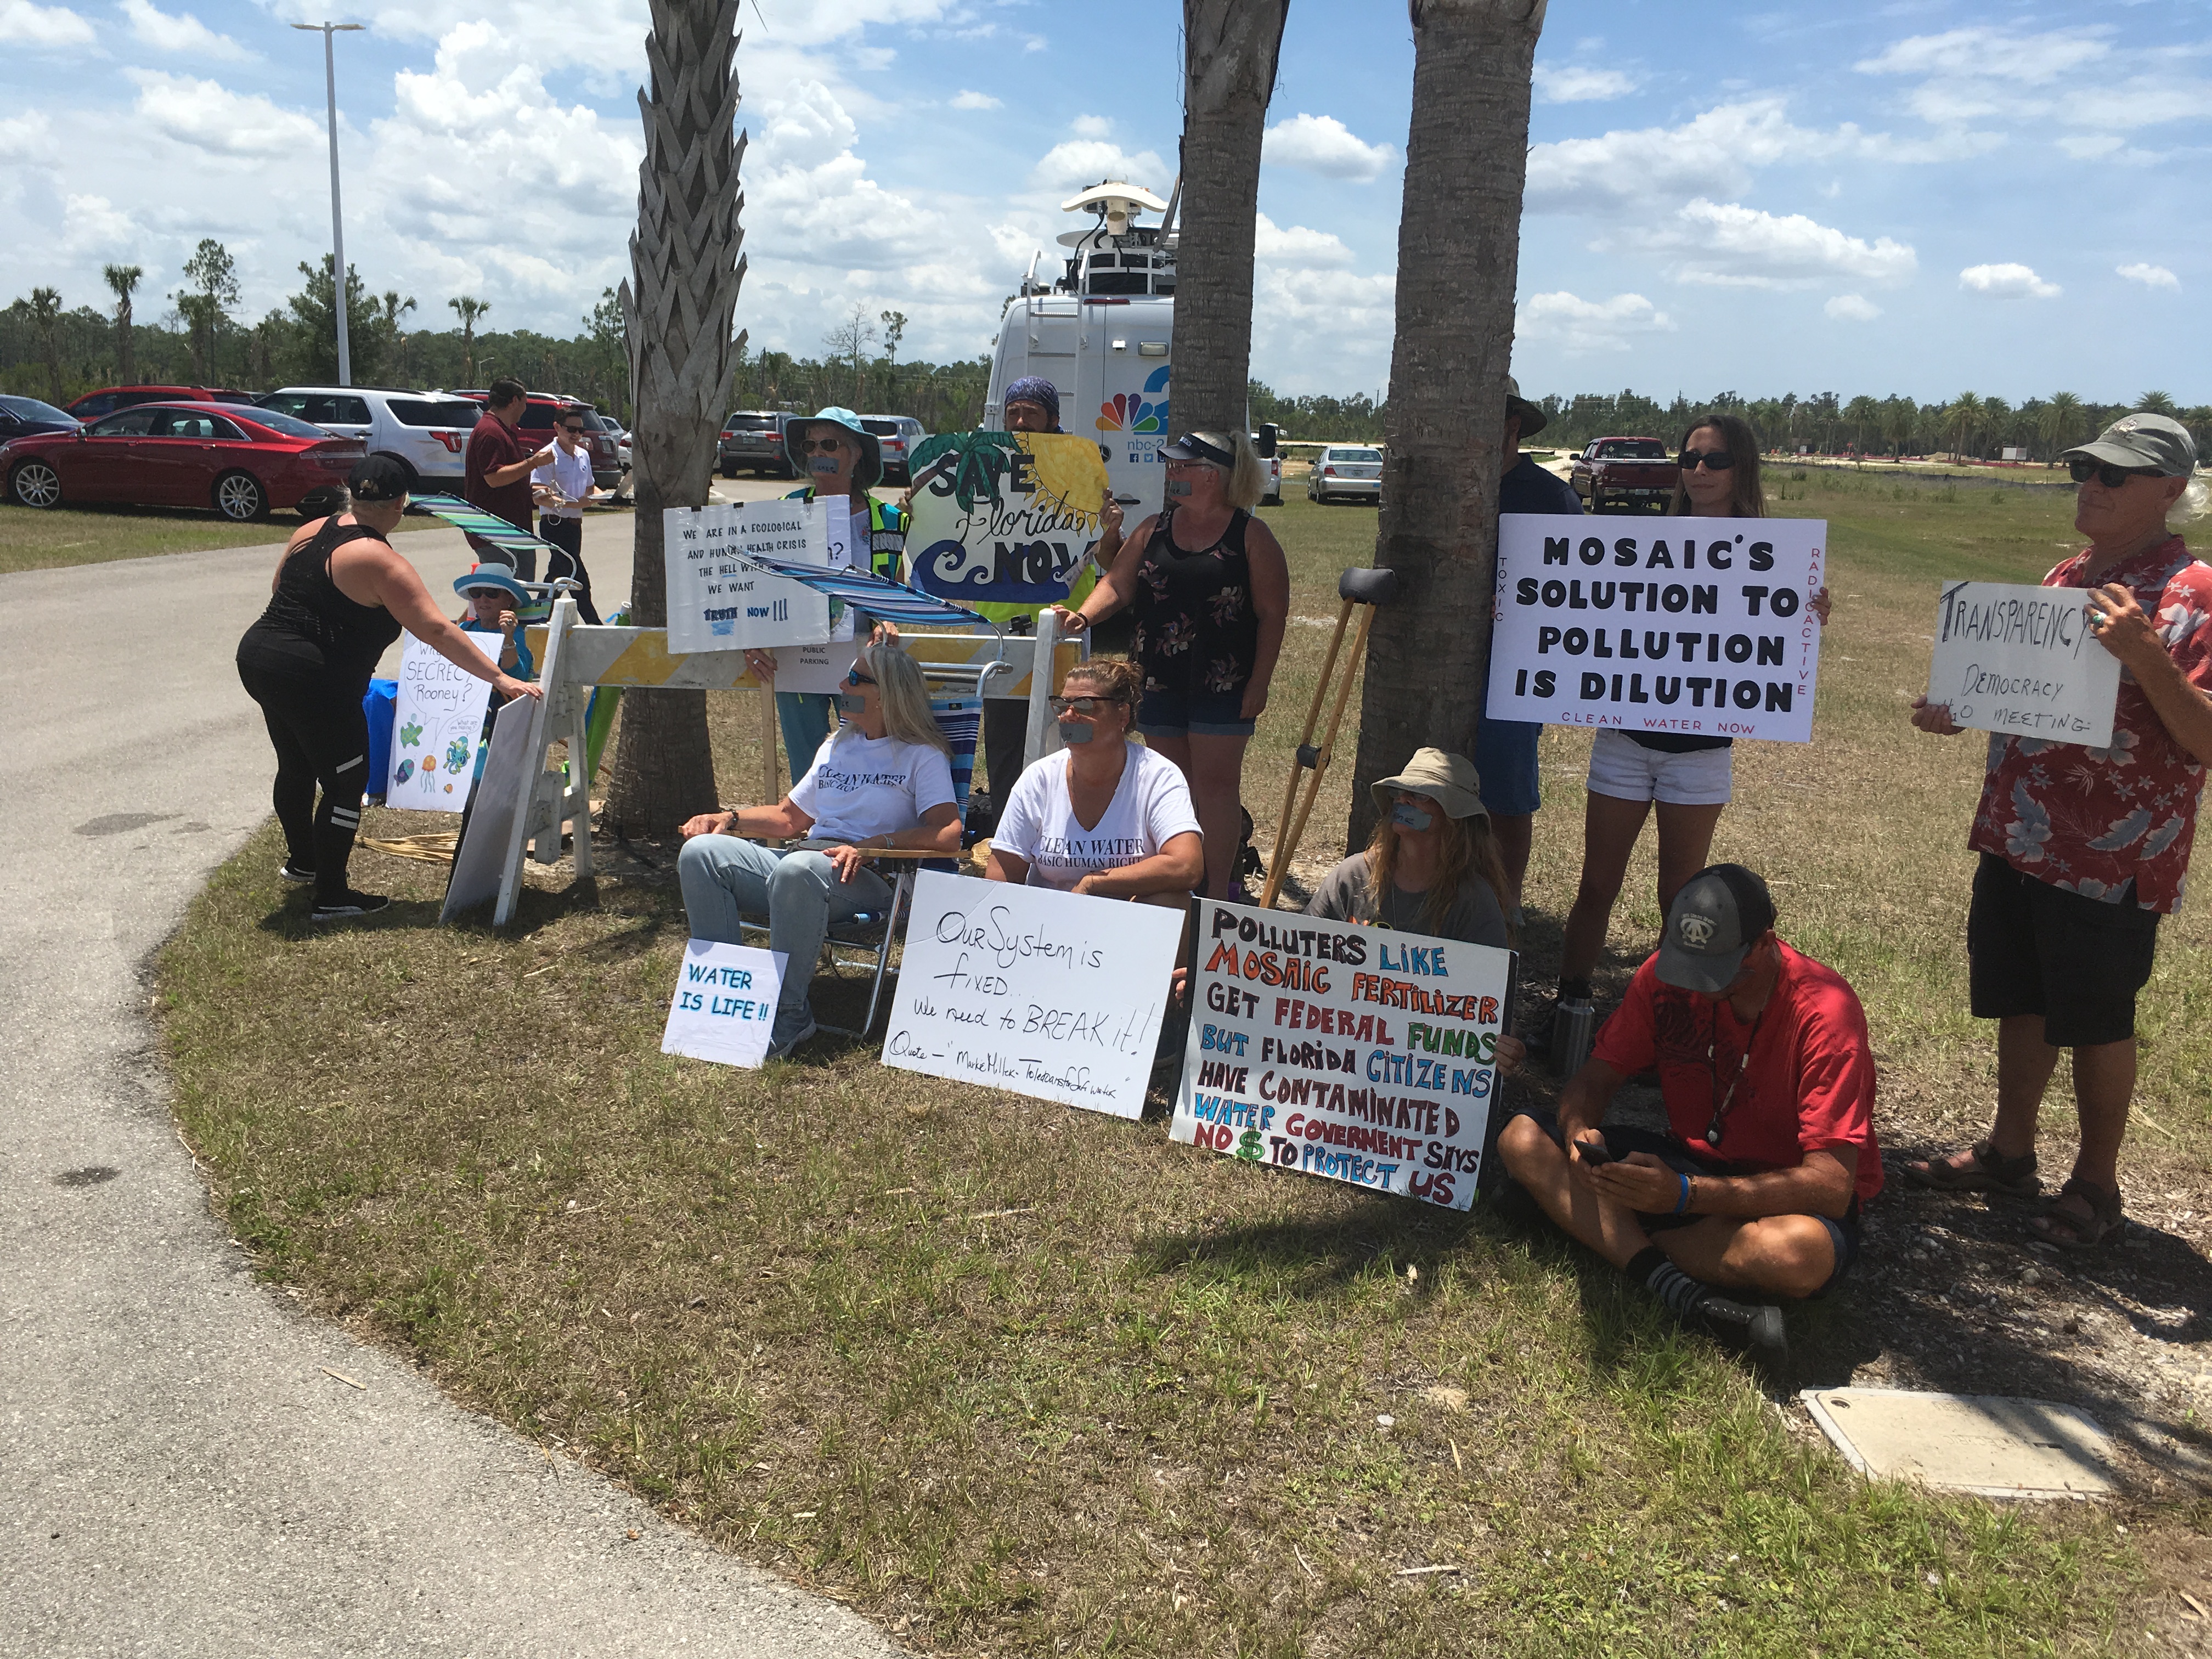 05-07-19 Protesters at Rooney roundtable